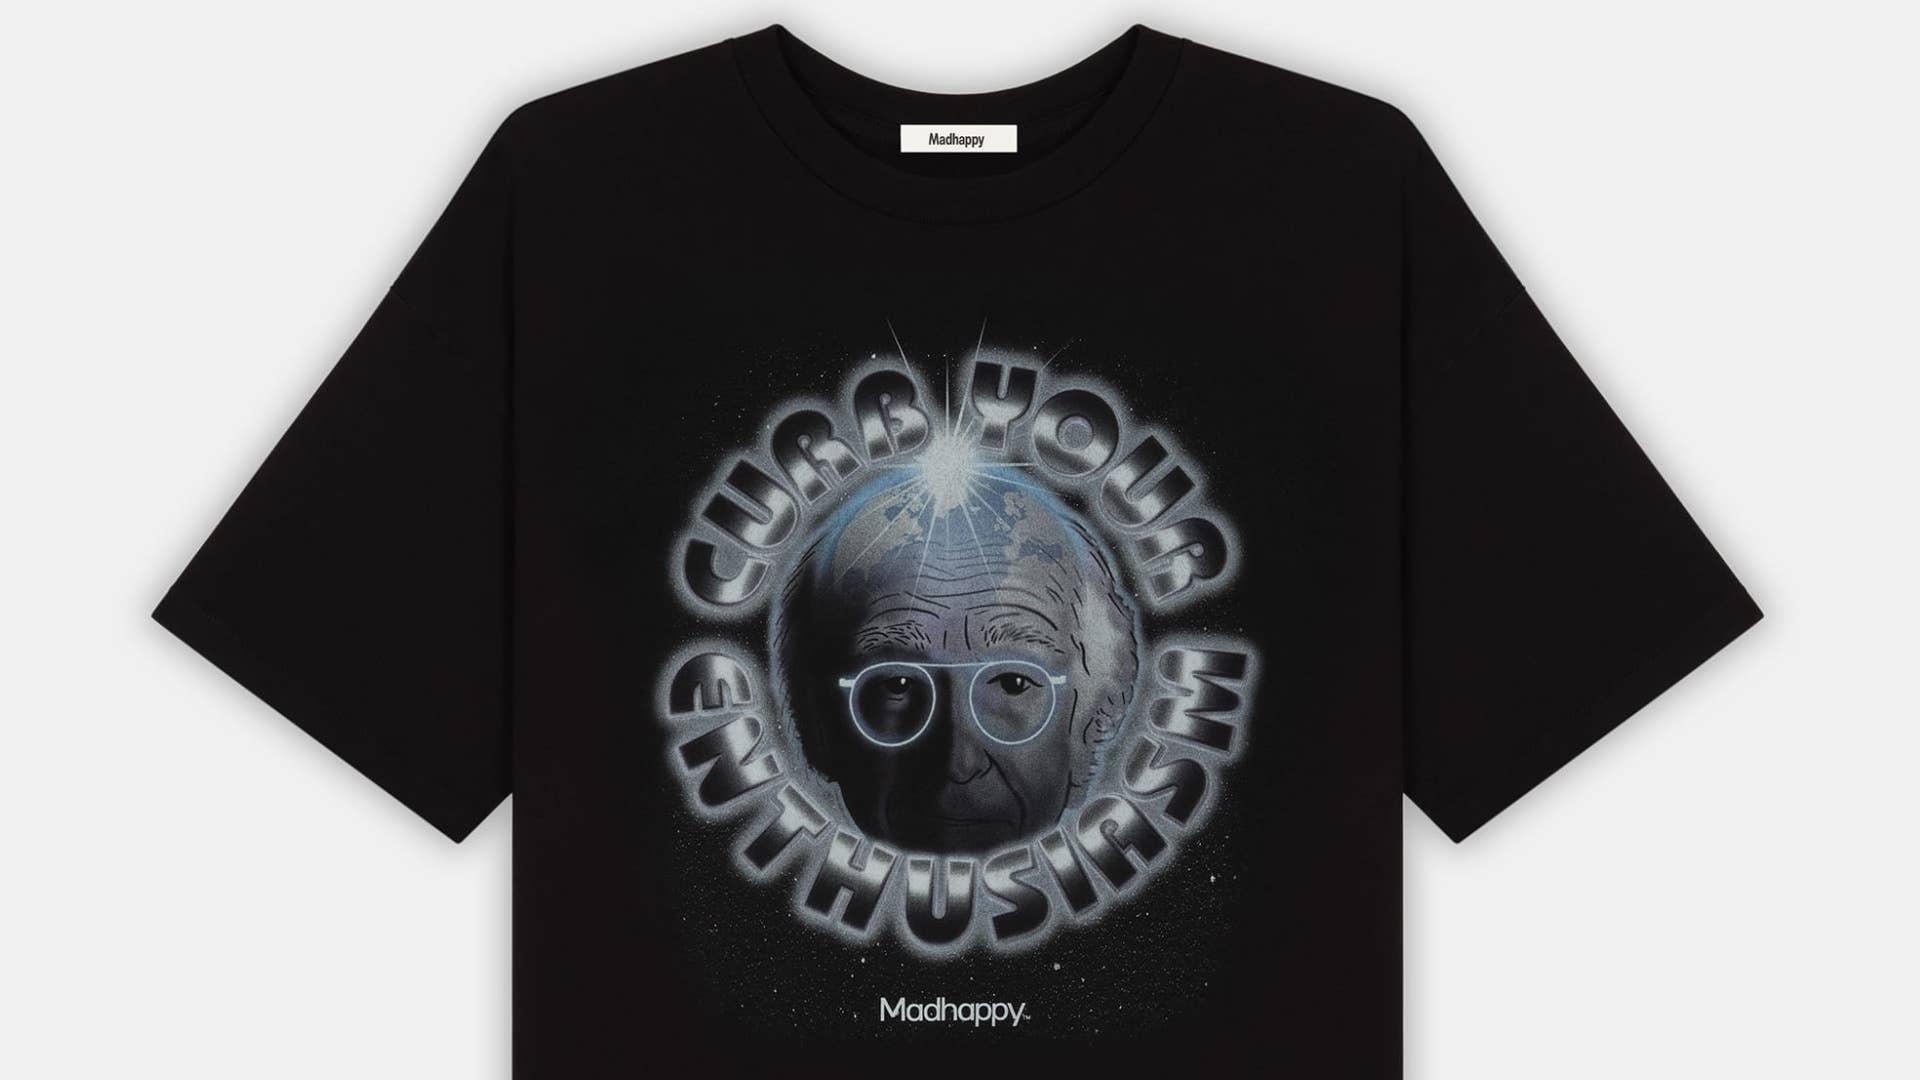 T-shirt for Madhappy x Curb Your Enthusiasm